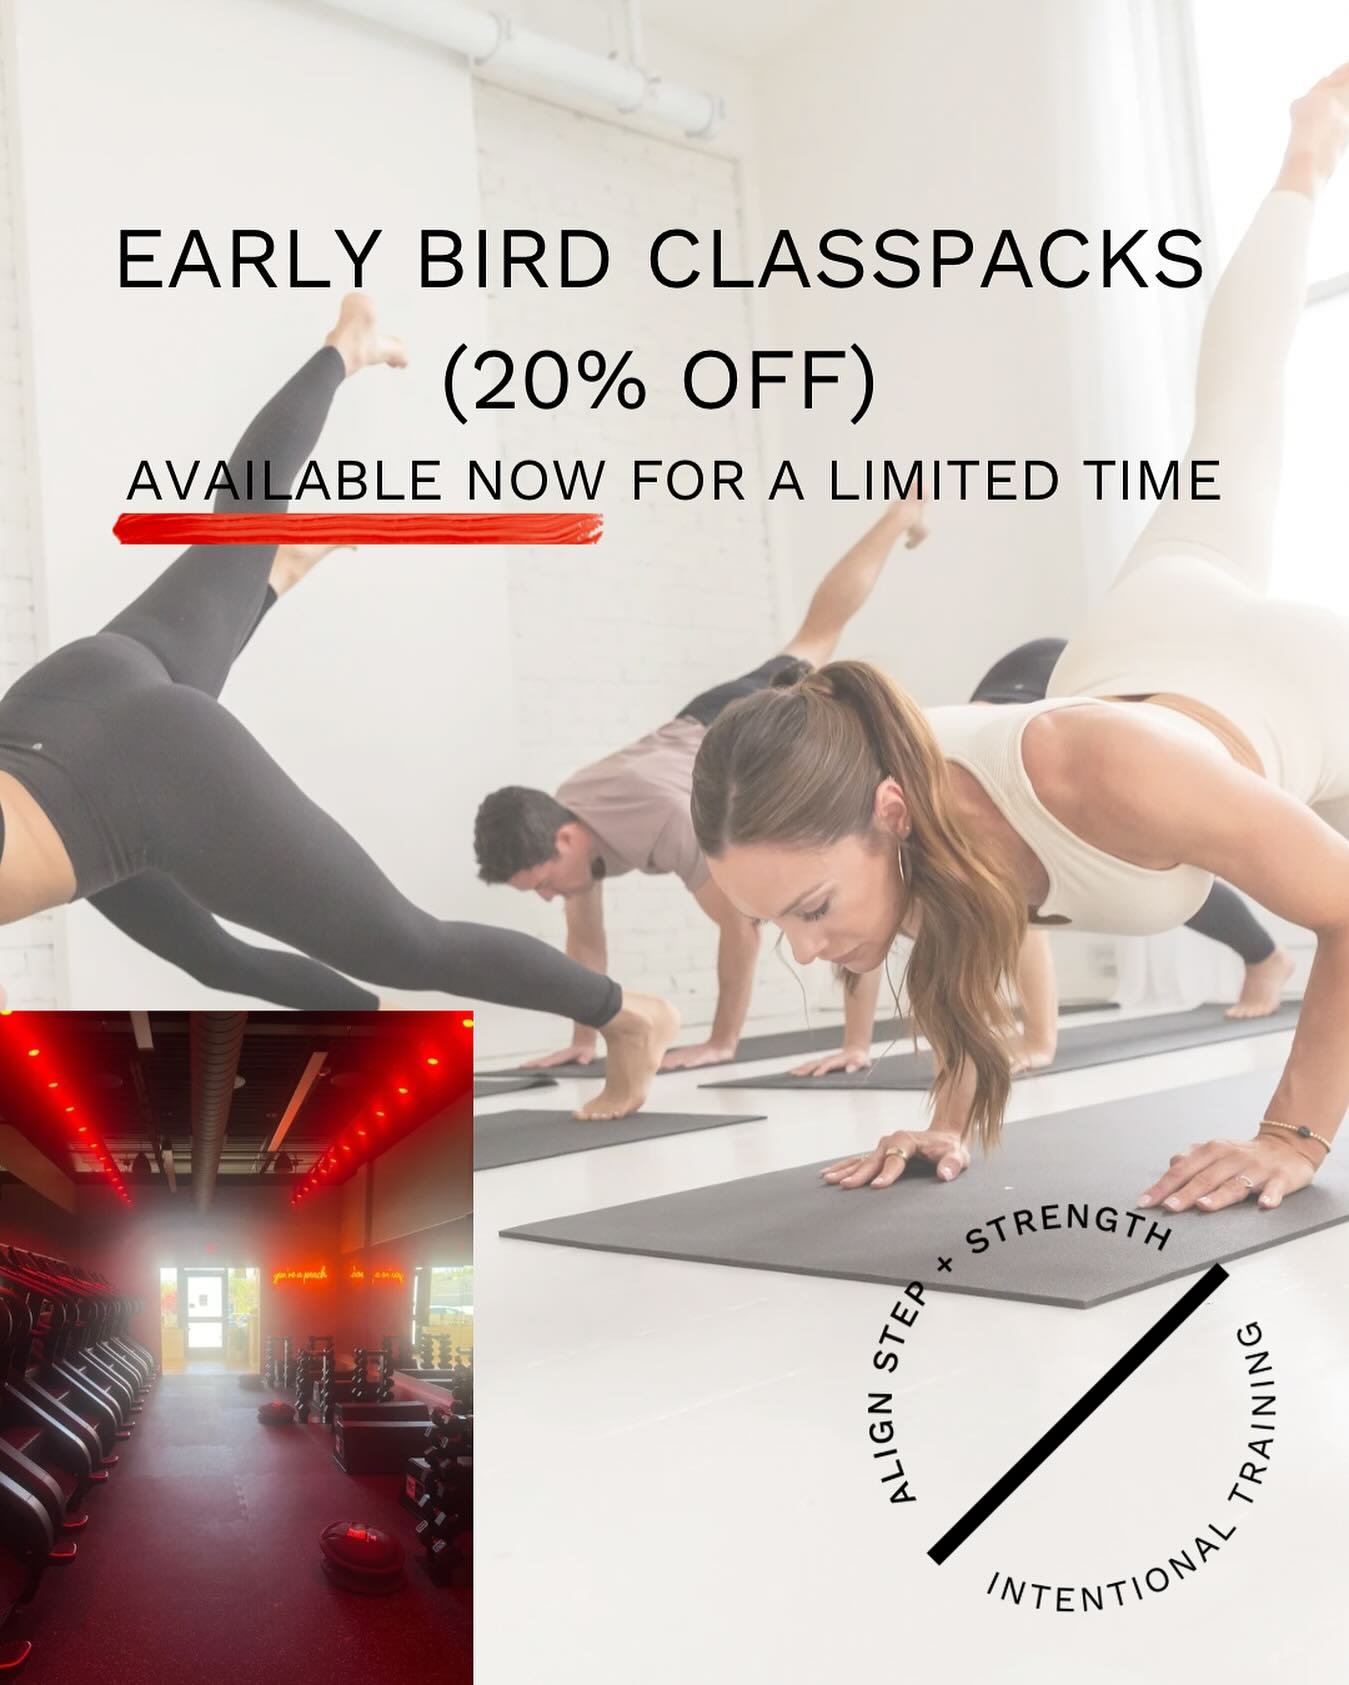 Don&rsquo;t miss the chance to get early bird pricing at the only Stairmaster + Strength Training class studio in all of New England. 

We are thrilled to share that ALIGN is SO CLOSE to opening. We plan to open our doors by the end of THIS month, gi